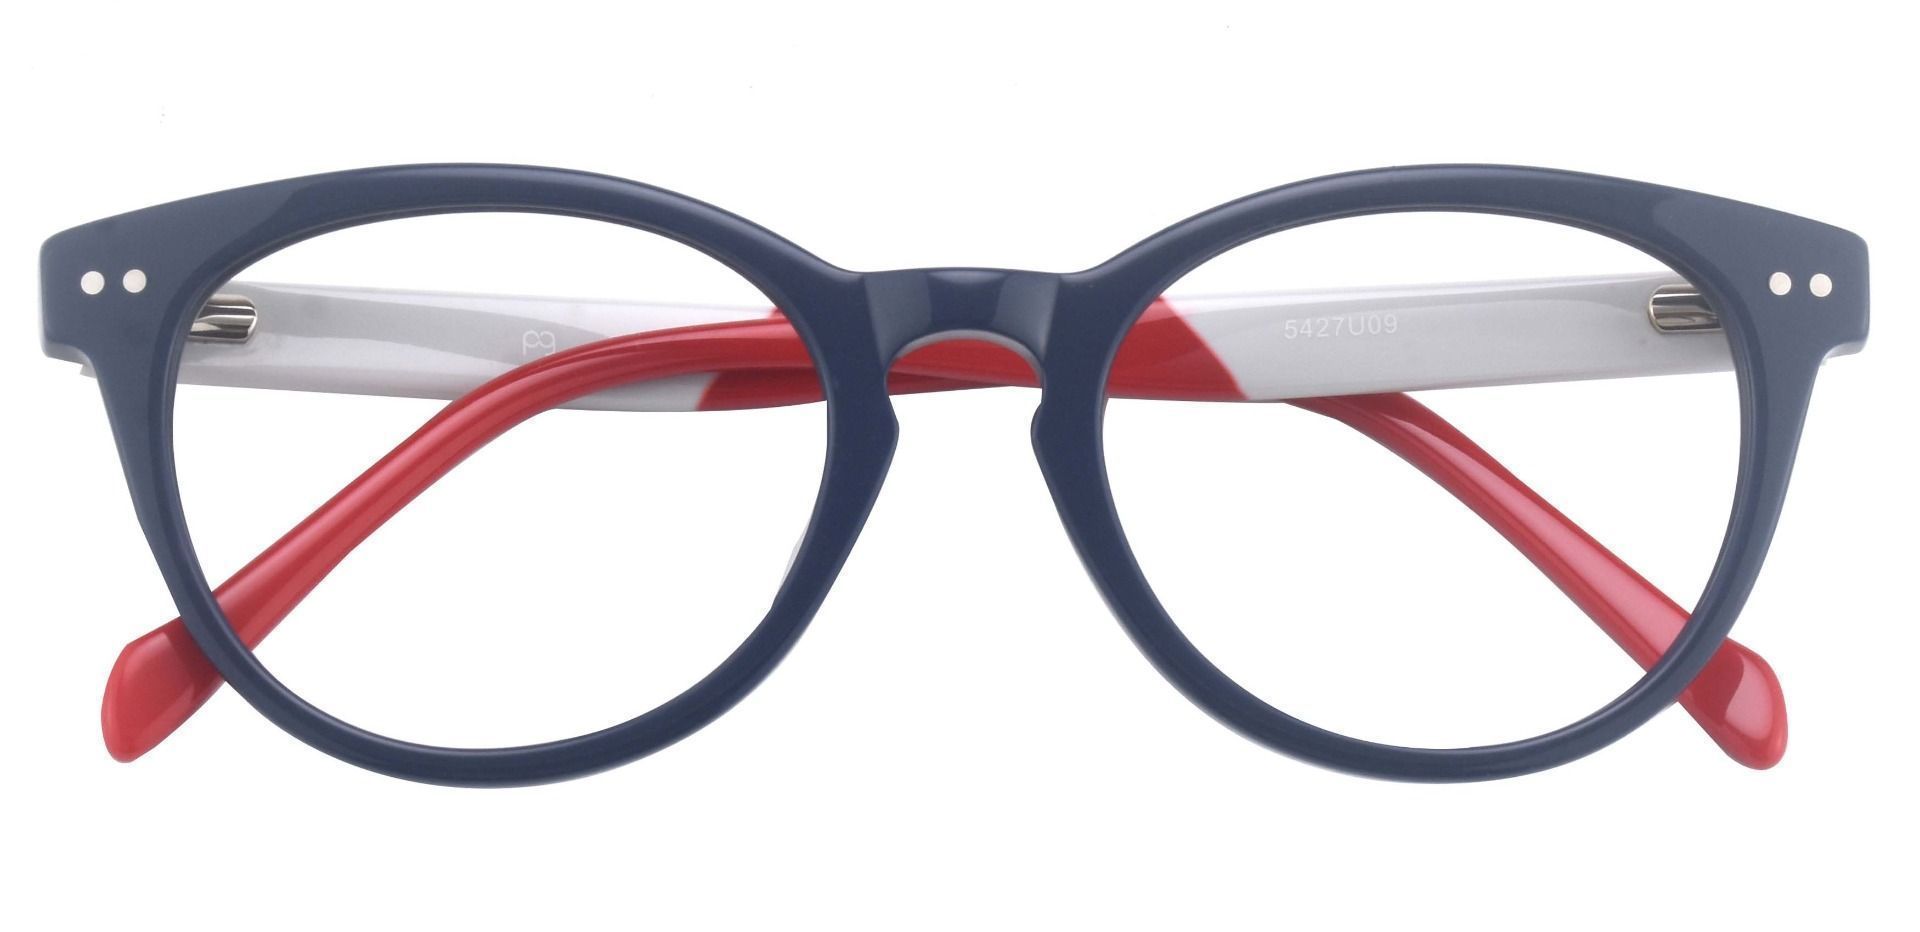 Revere Oval Lined Bifocal Glasses - The Frame Is Blue And Red